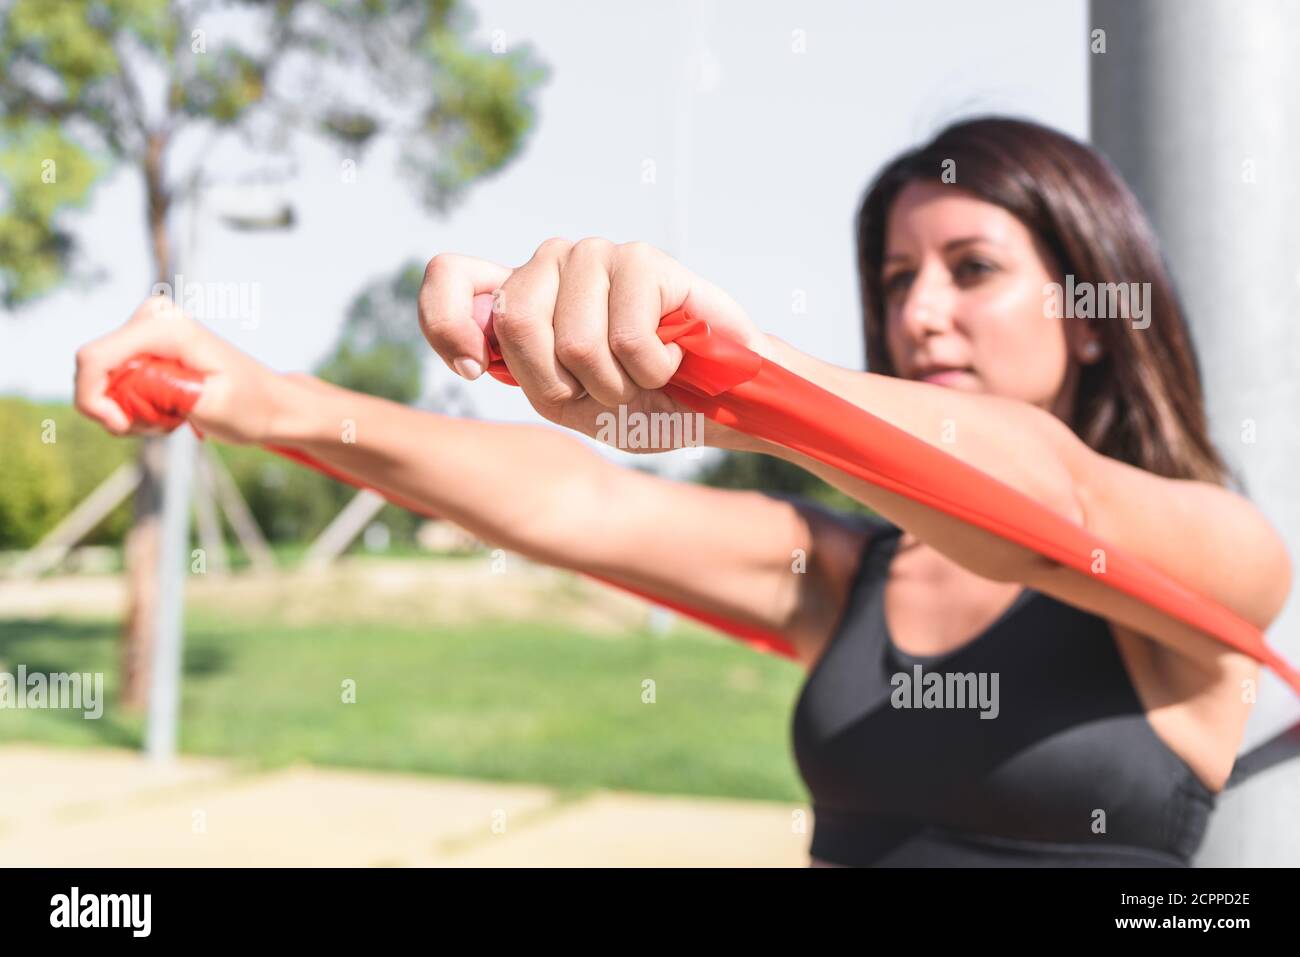 latin woman exercising using resistance bands with the help of light post on a green park. selective focus on right hand Stock Photo